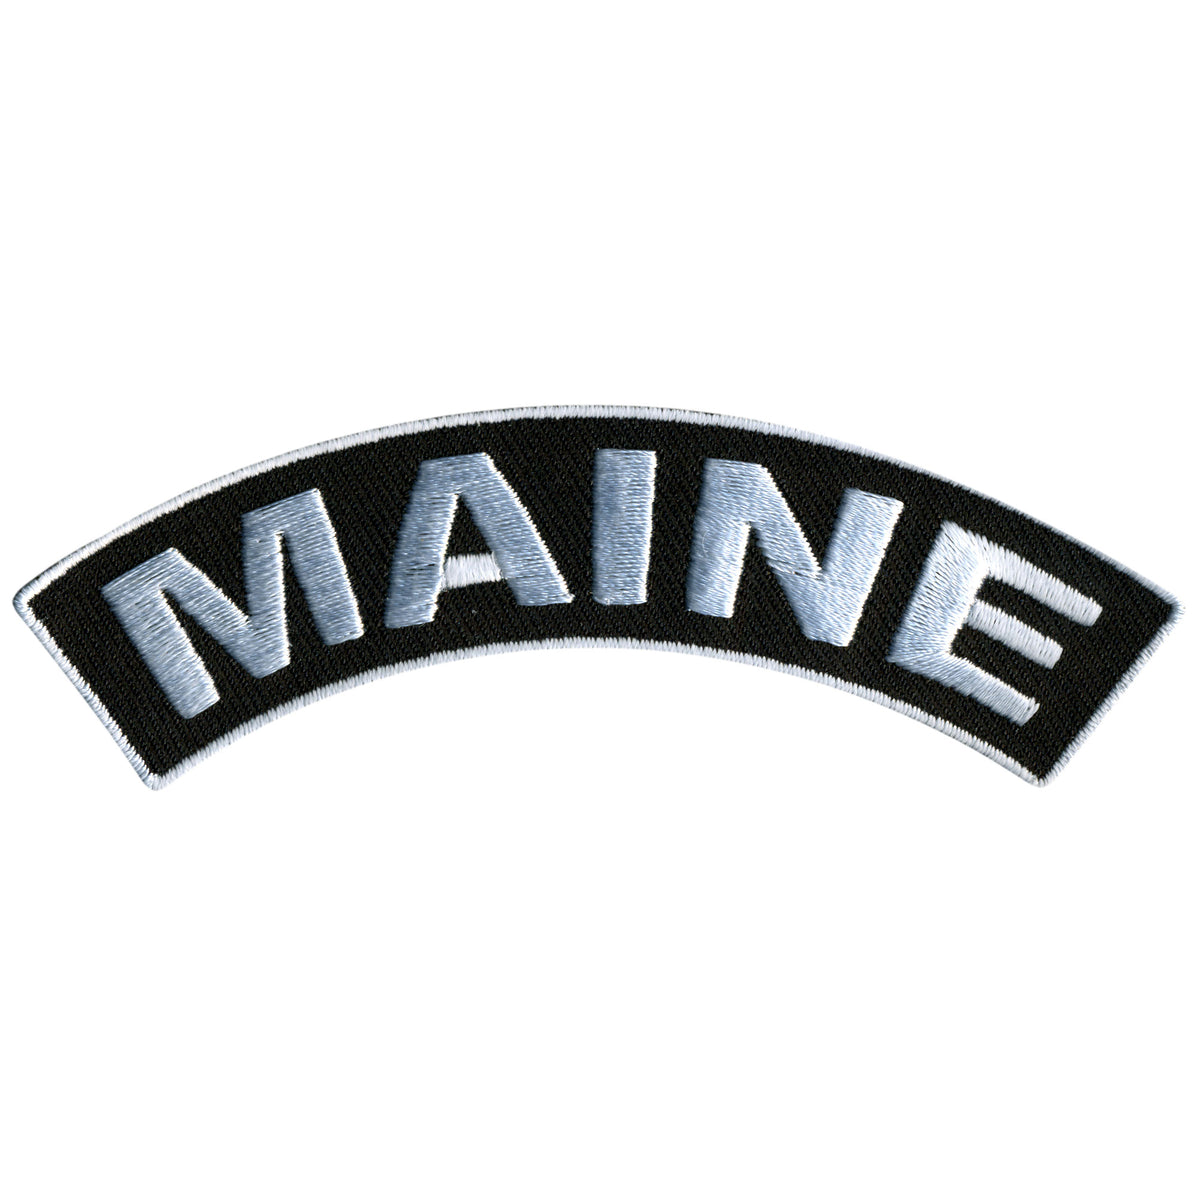 Hot Leathers Maine 4” X 1” Top Rocker Patch